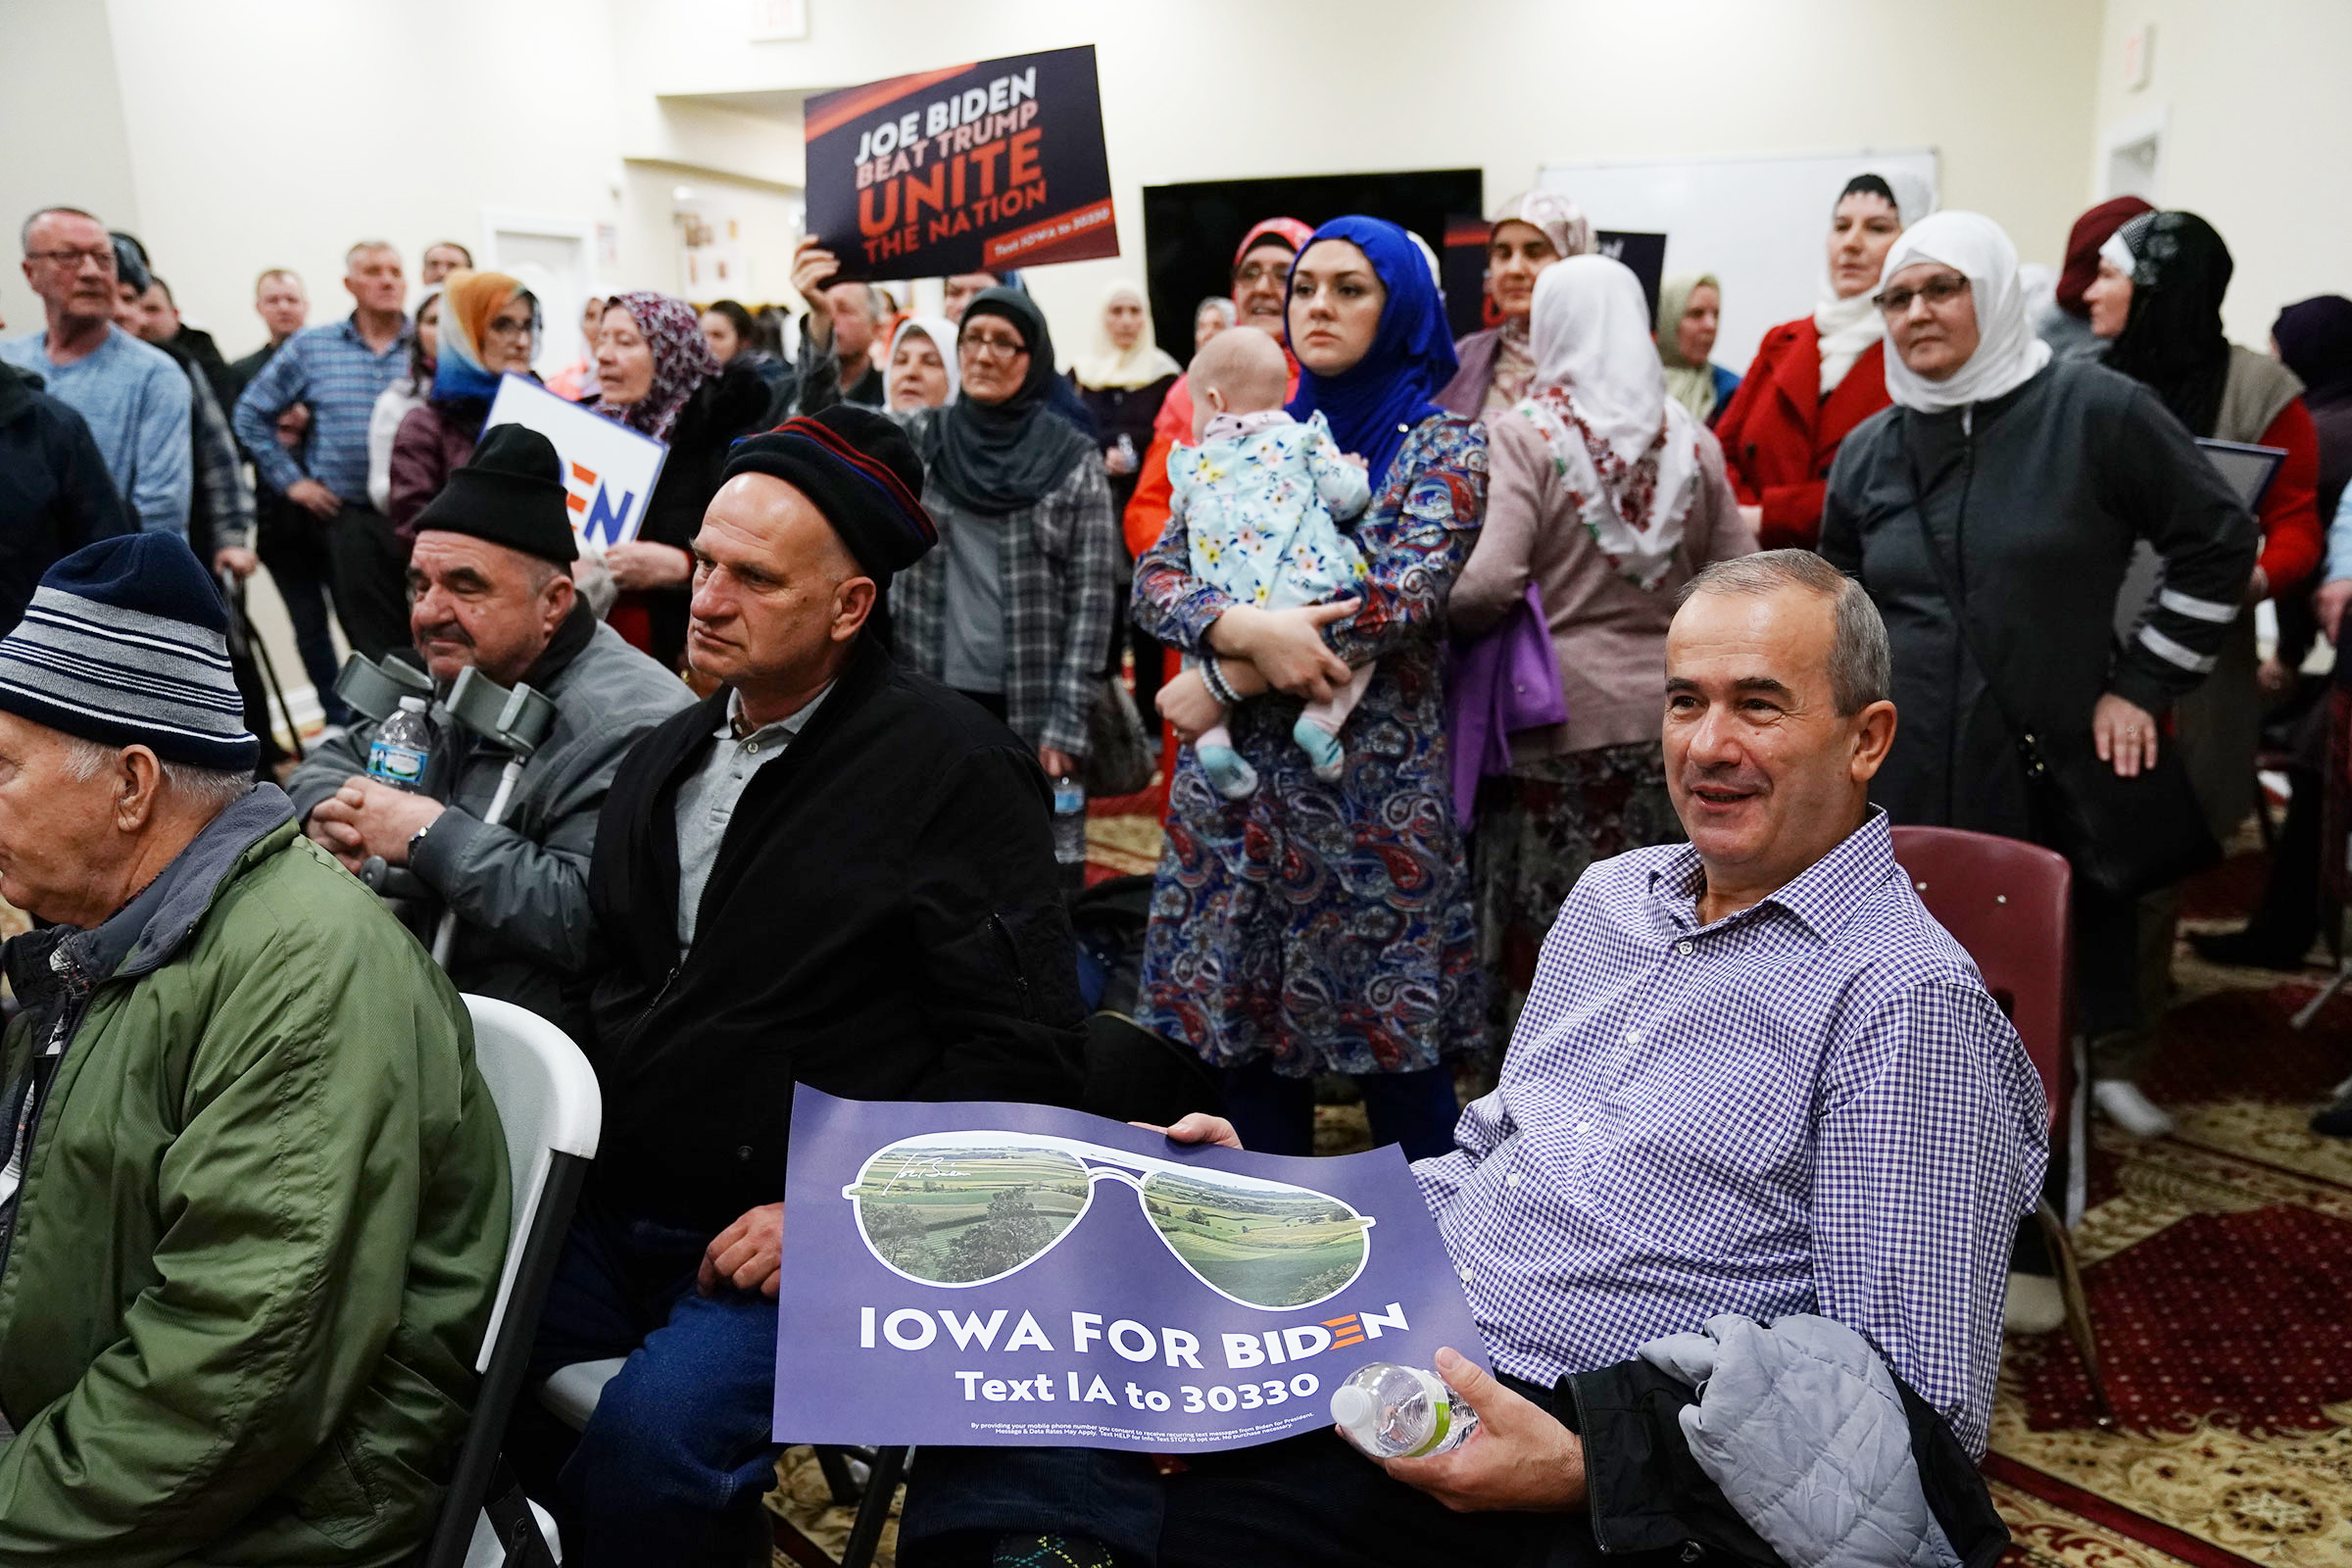 Has Biden Done Enough to Win Over Muslim Voters? Time